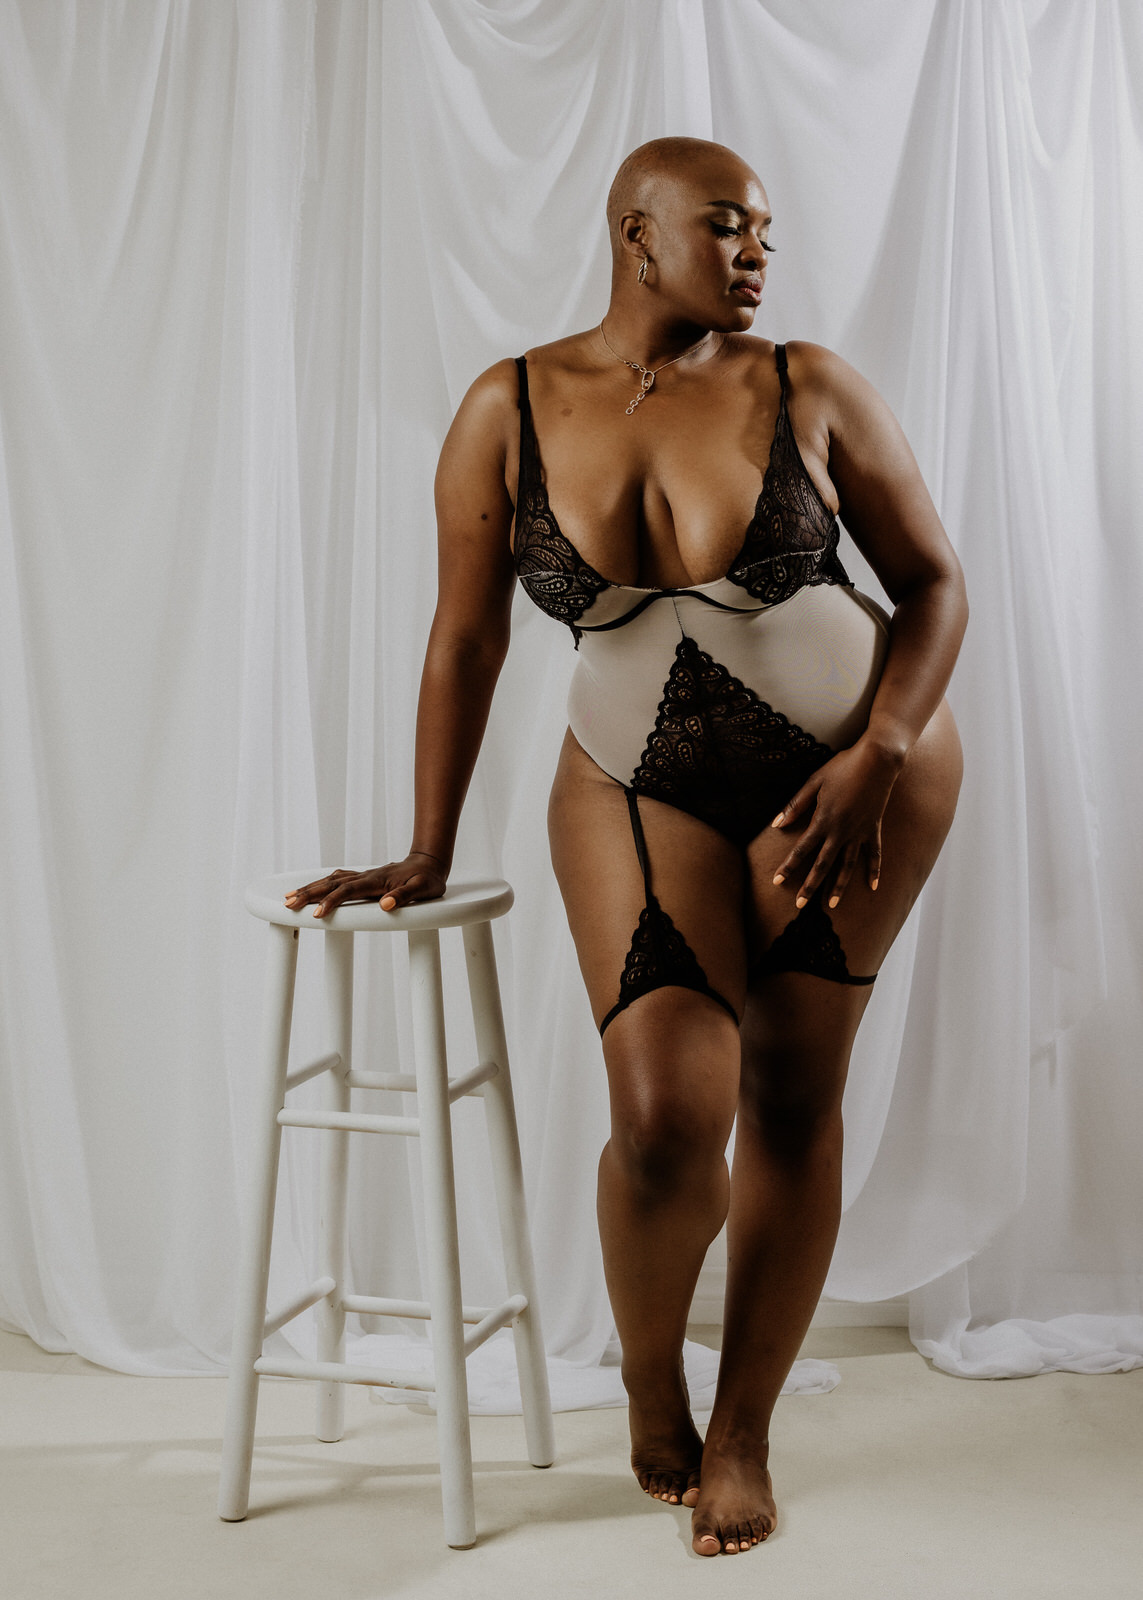 vancouver boudoir photographer image of plus size black woman with alopecia wearing lingerie and leaning on stool